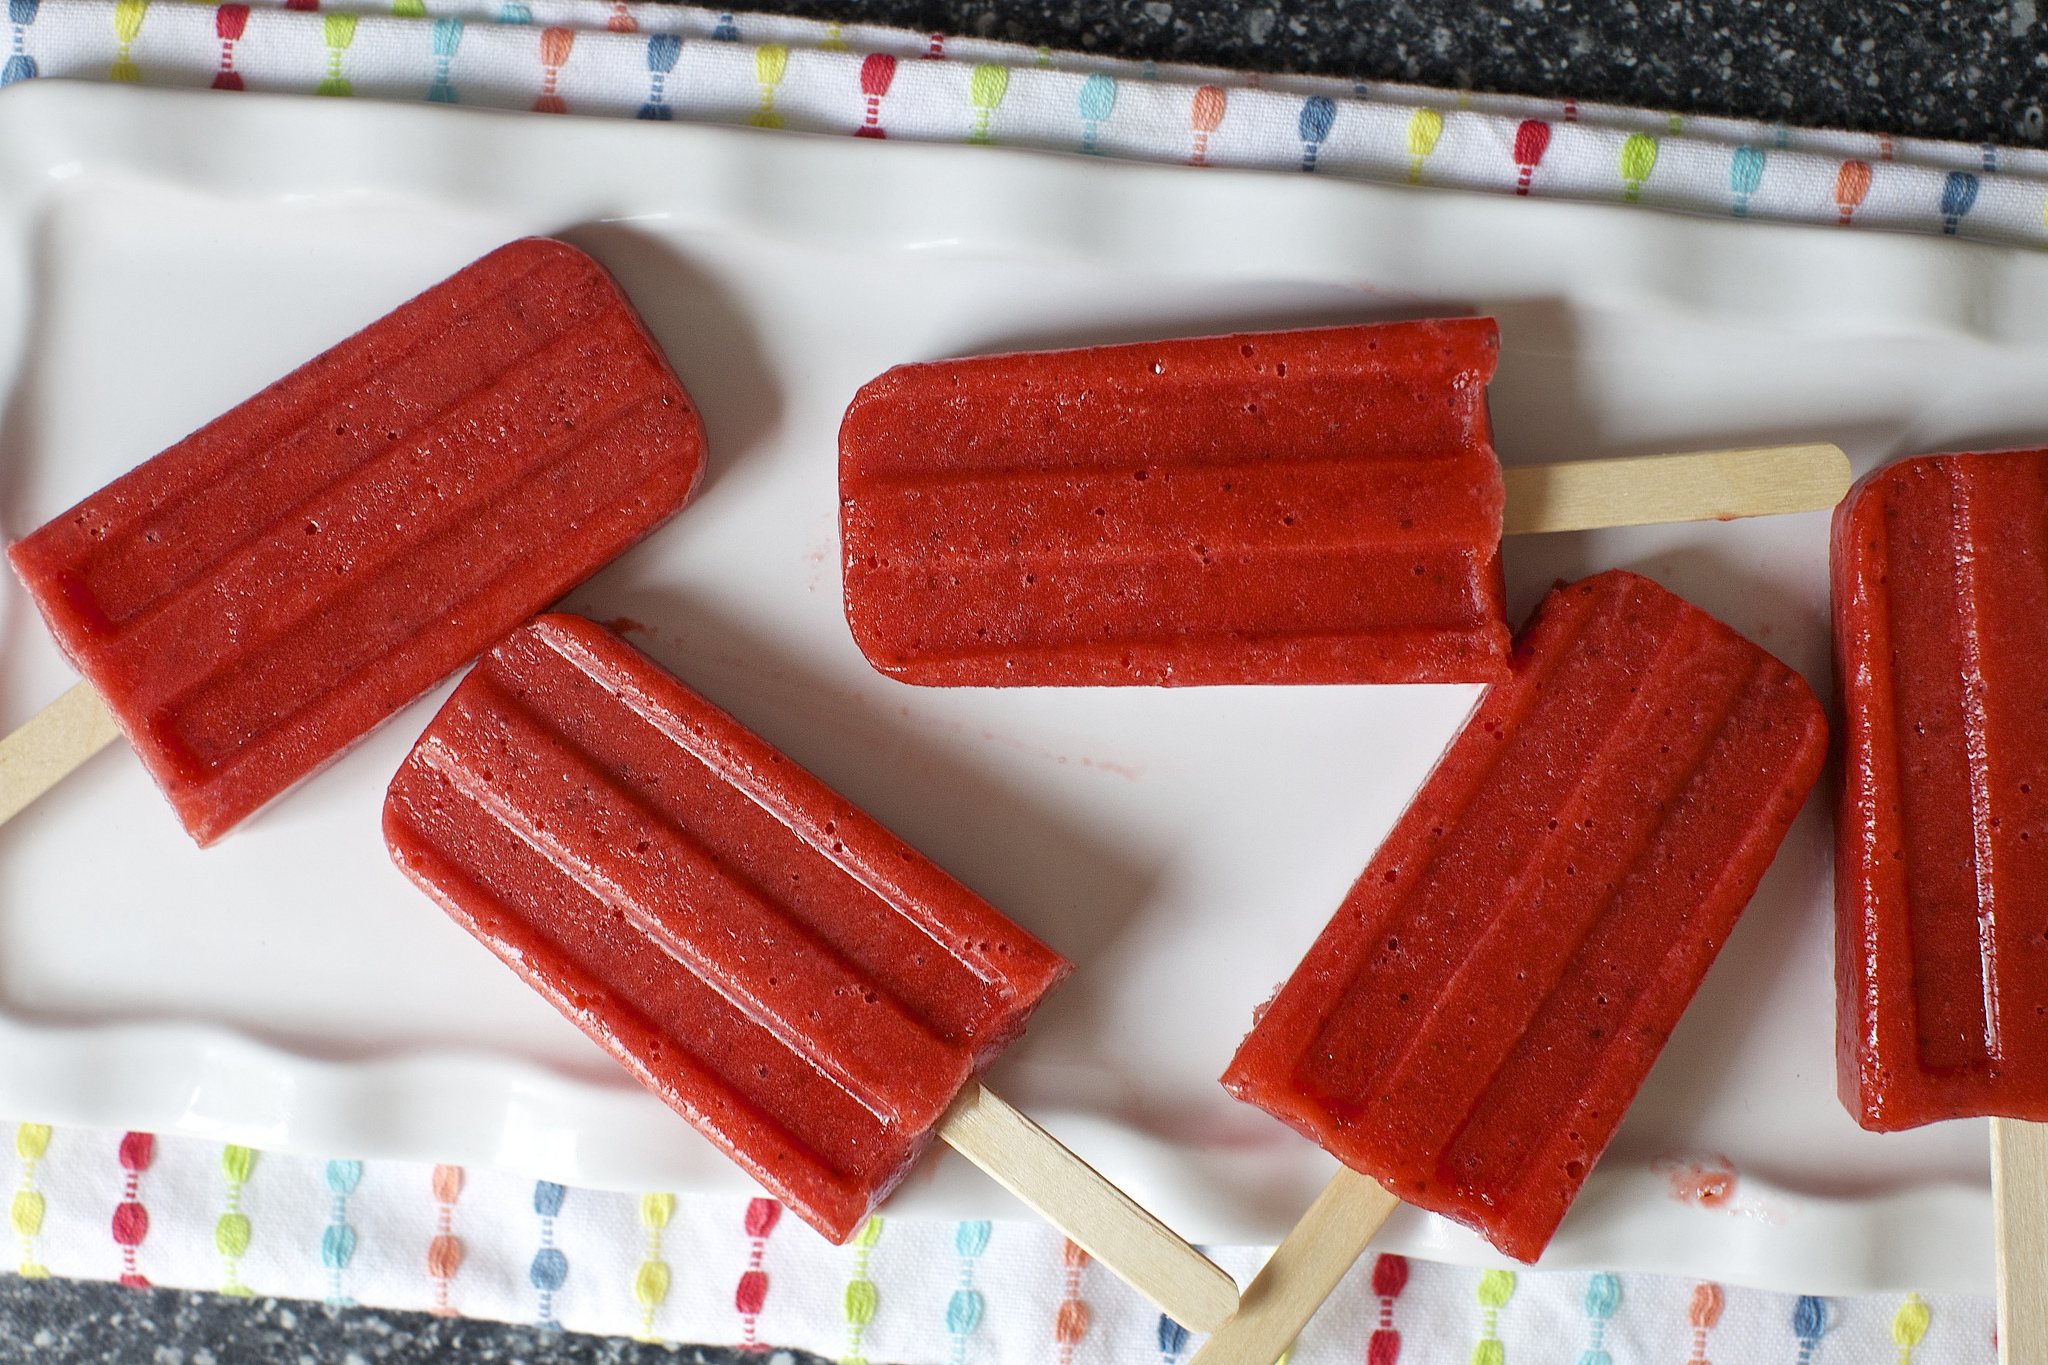 why do some popsicles have two sticks and when was the double stick popsicle introduced